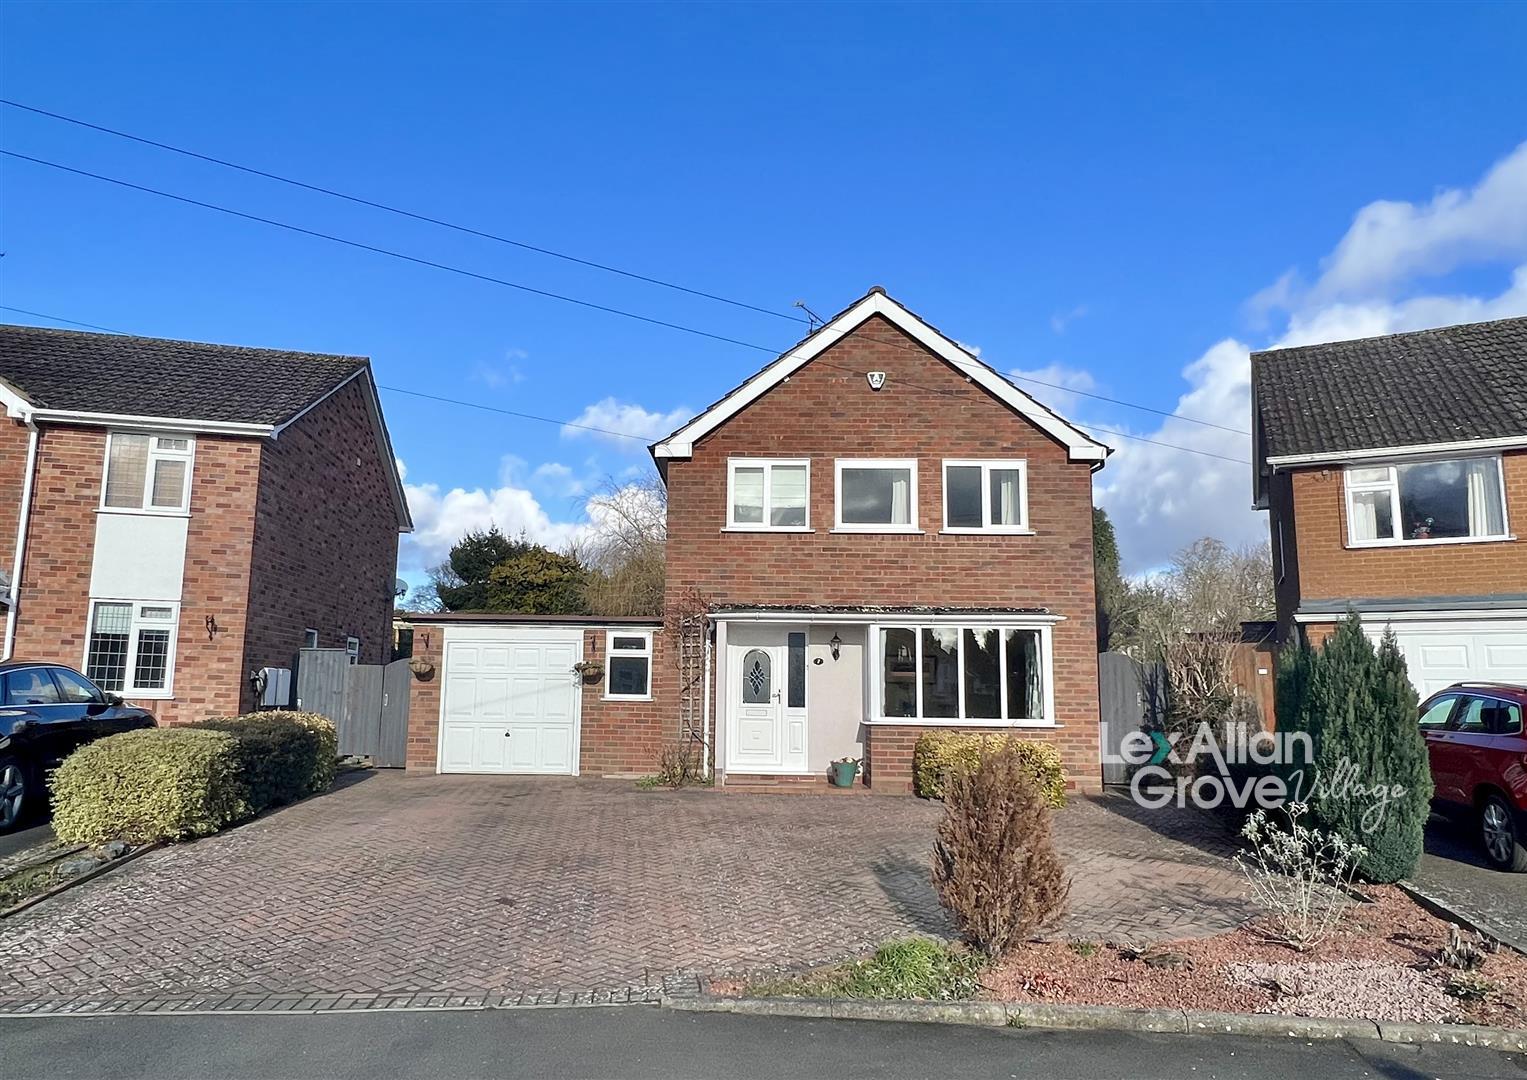 3 bed  for sale in Lodge Crescent, Stourbridge, DY9 